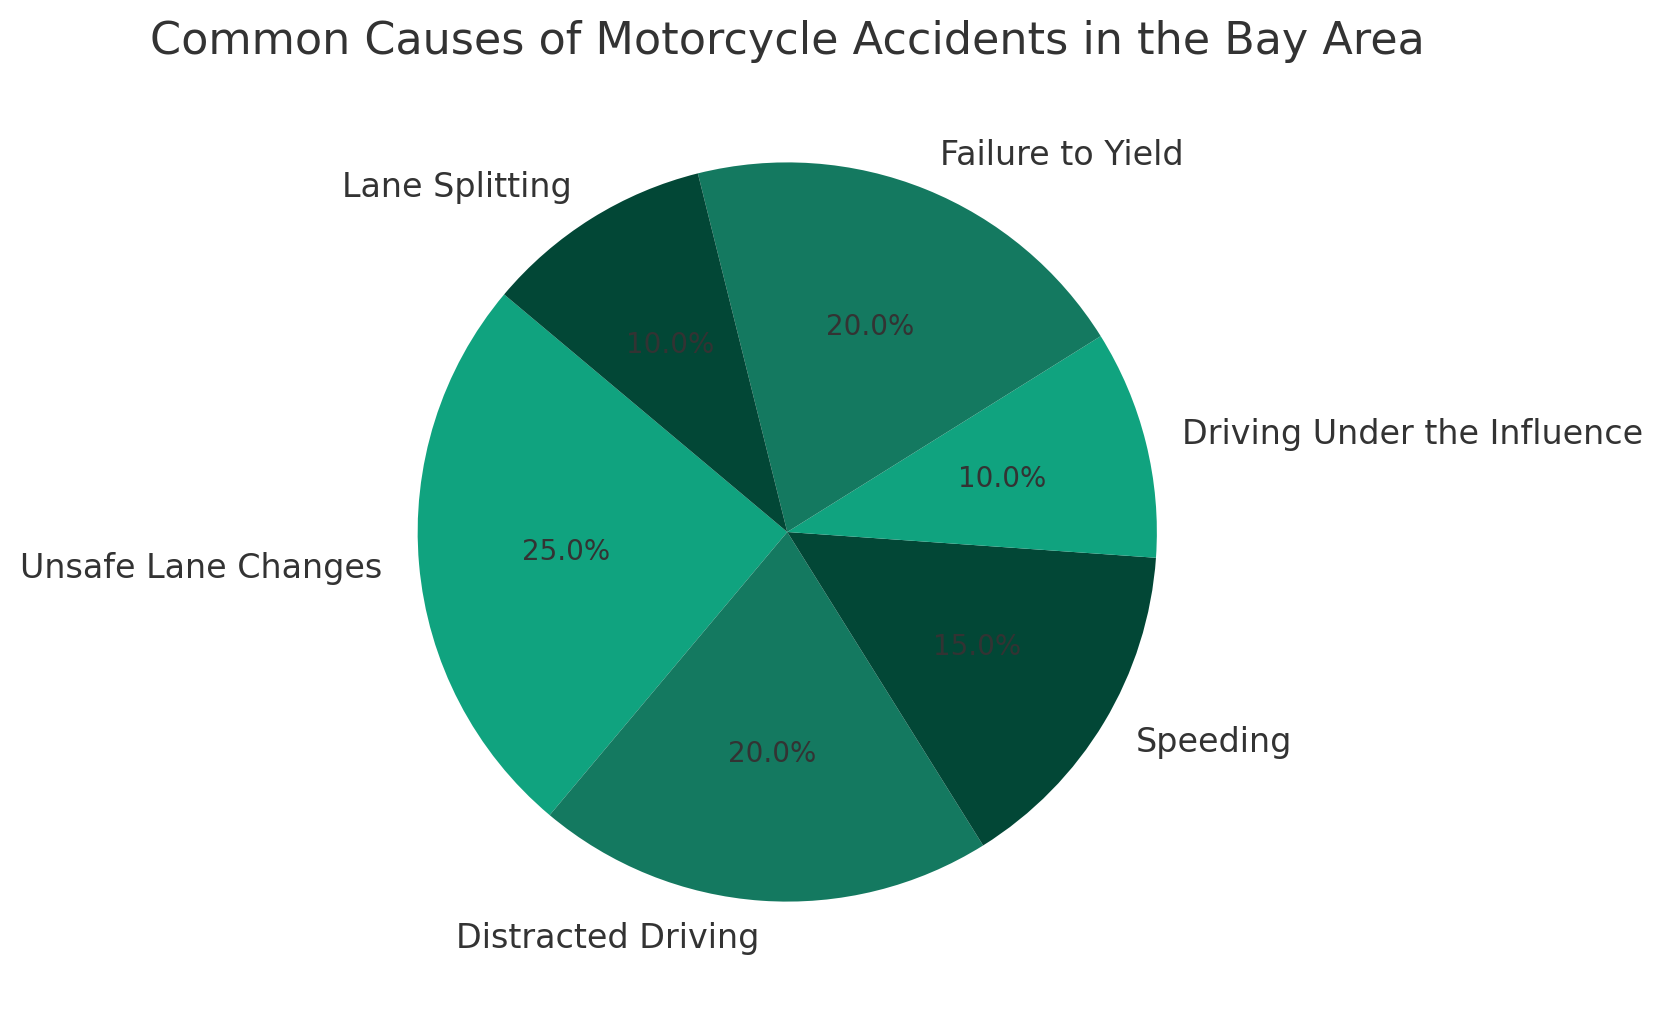 Common Causes of Motorcycle Accidents in the Bay Area